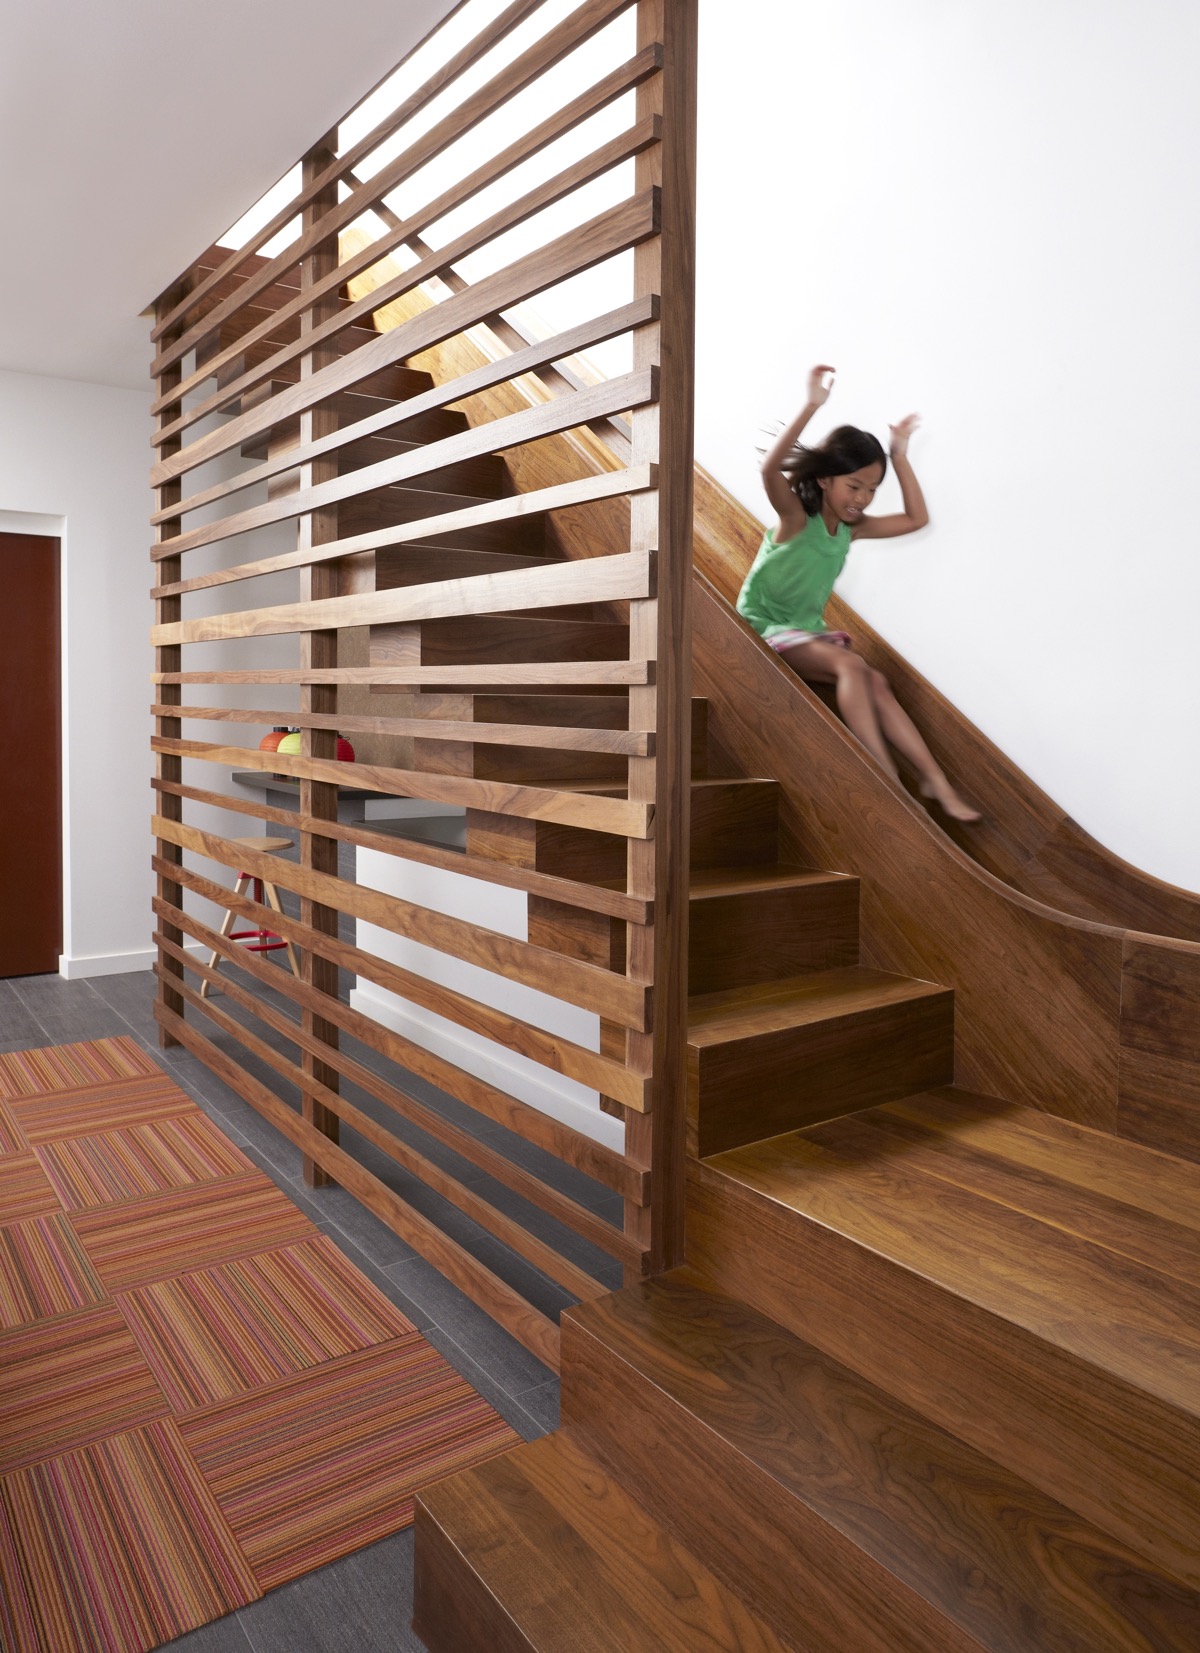 Entertain the child in you – or the children in the family – by incorporating a fun slide into the design. This doesn’t have to look clumsy or garish in childish colors, explore the possibilities in your favored staircase material.